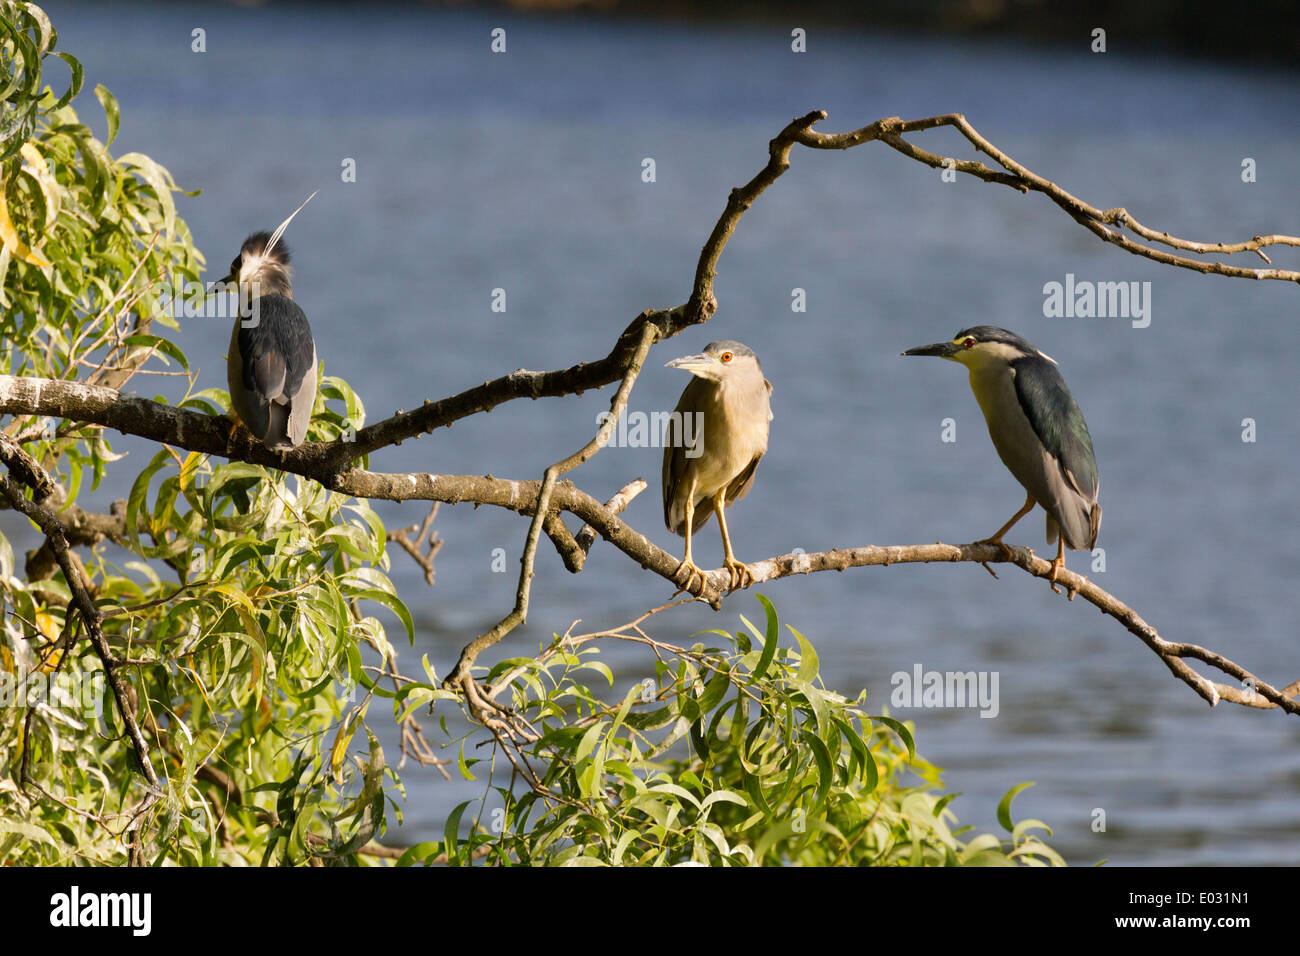 Crowned Herons perched on a tree by Lake Kandy, Sri Lanka 2 Stock Photo